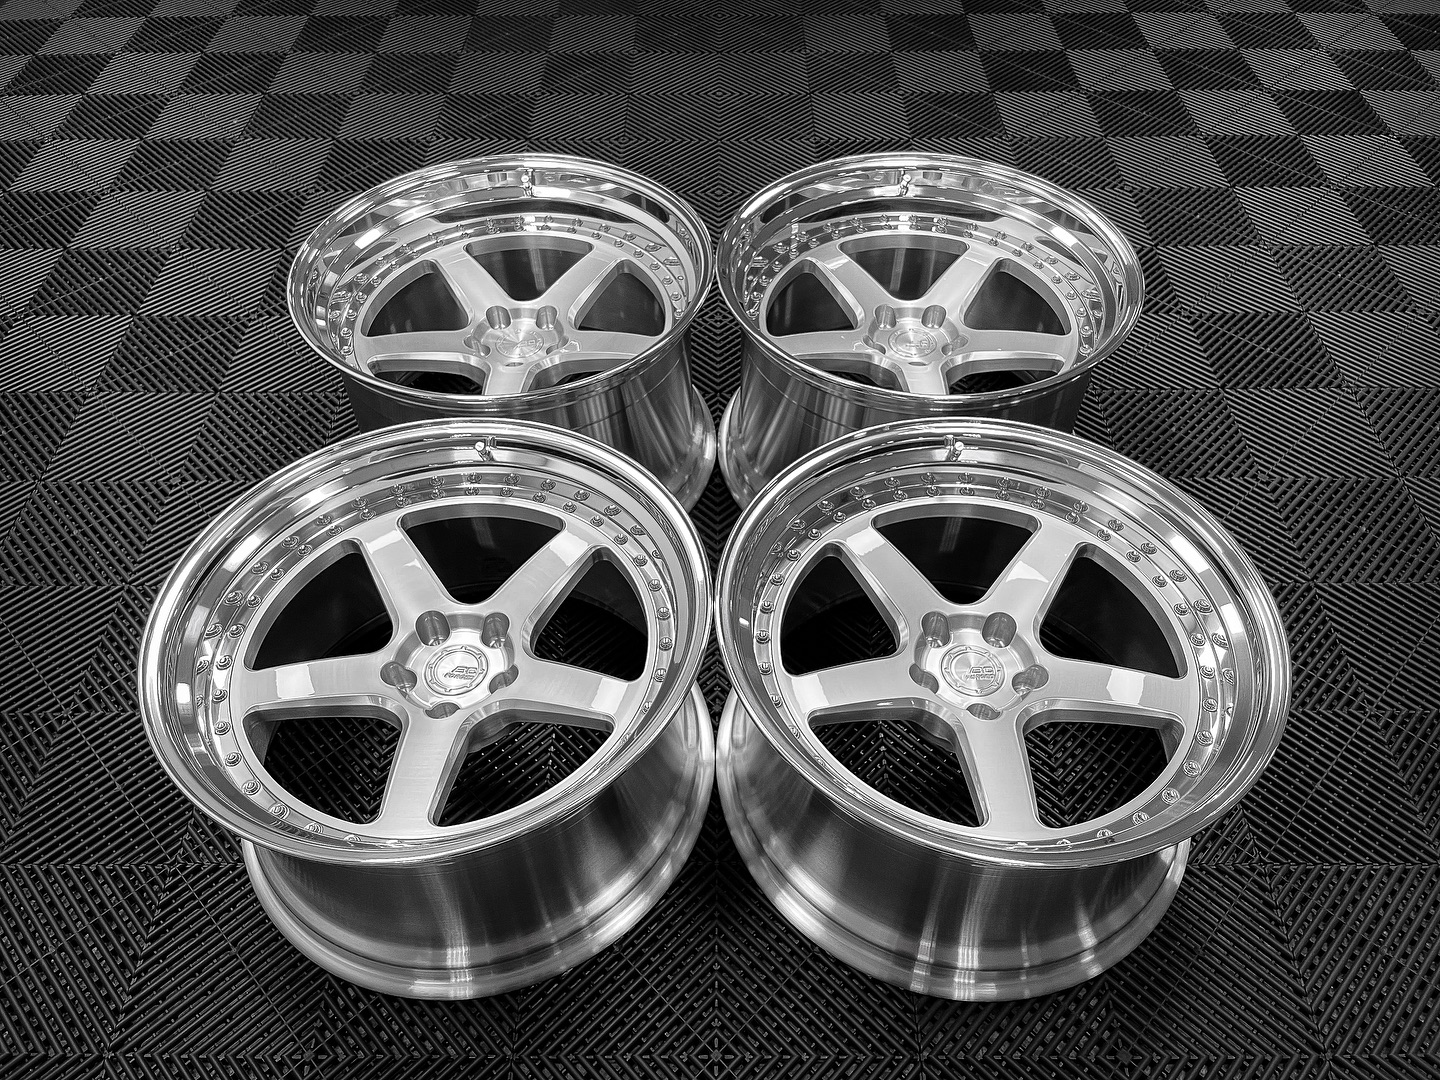 S650 Mustang Authorized Dealer BC Forged Wheels: Monoblock And Modular Series Wheels For Mustang S650 409459074_18389275156064104_3237549127433482049_n